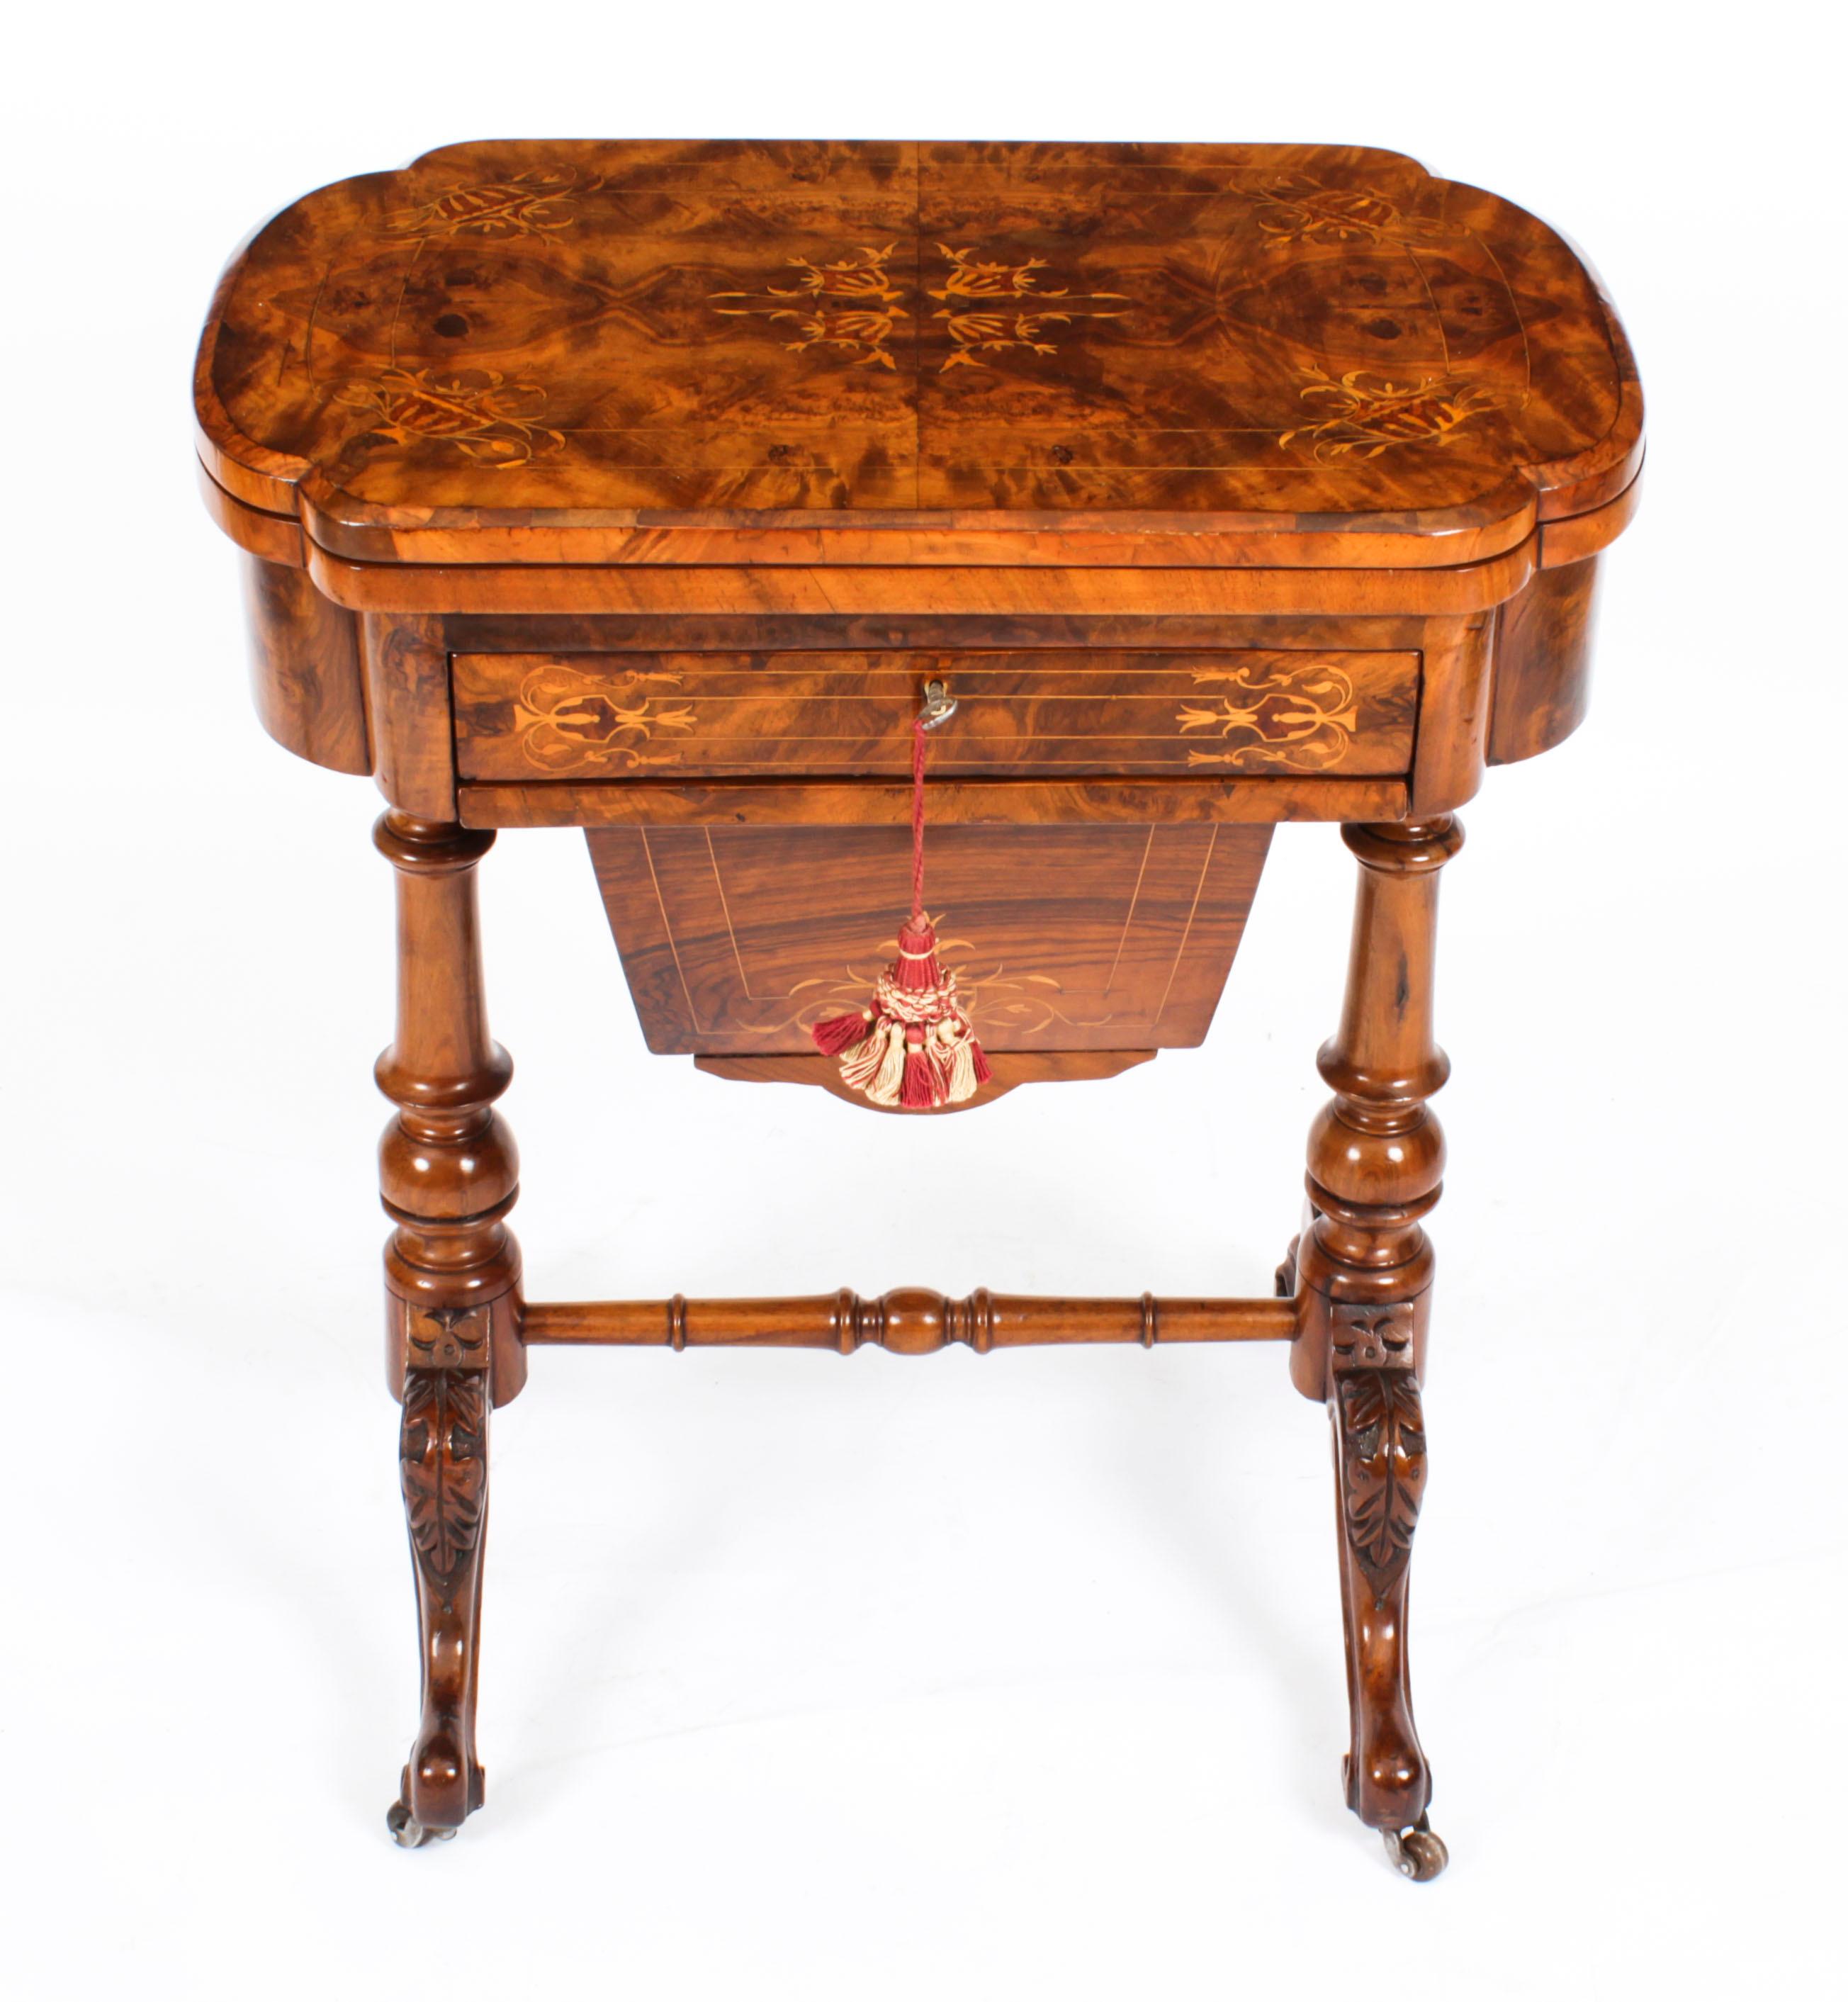 This is a fabulous antique Victorian burr walnut games and work table, circa 1870 in date.

It is made of beautiful burr walnut that has elegant satinwood line inlaid marquetry decoration. The hinged top opens to reveal a fabulous gaming interior